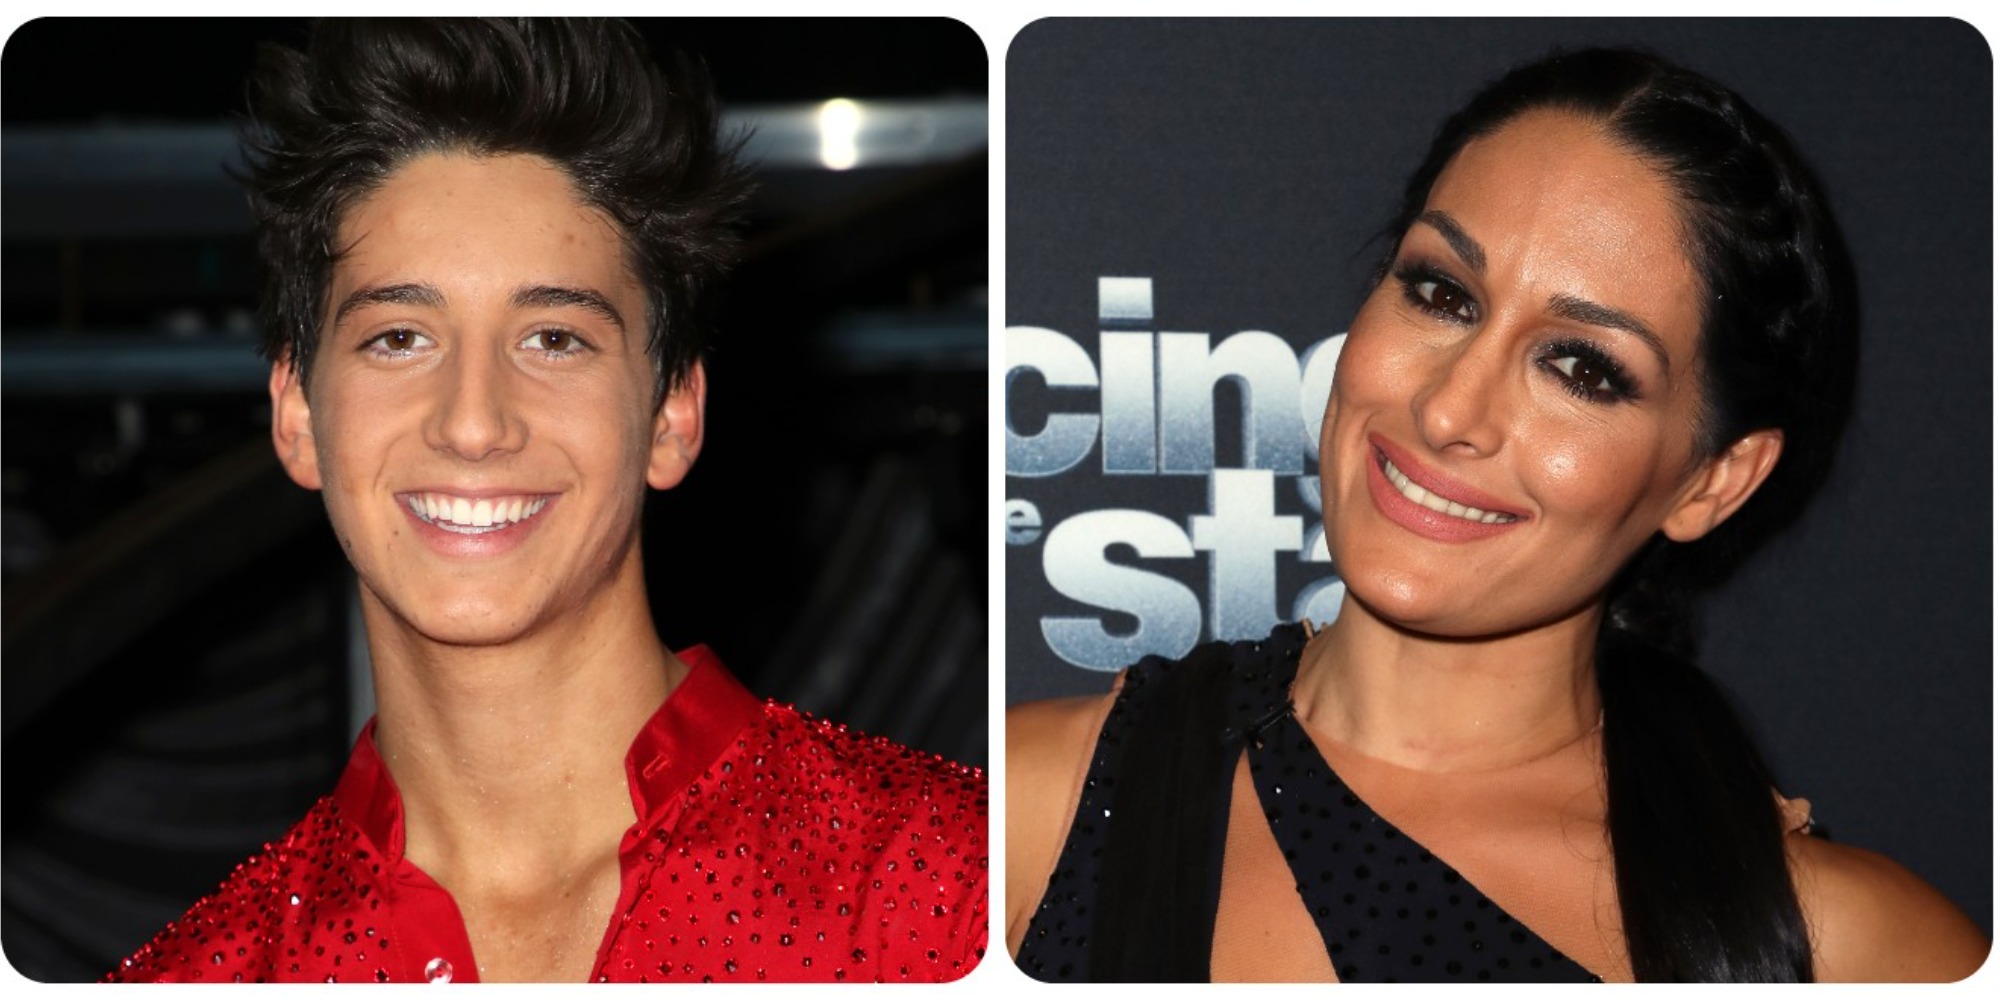 Milo Manheim and Nikki Bella both appeared on Dancing with the Stars.